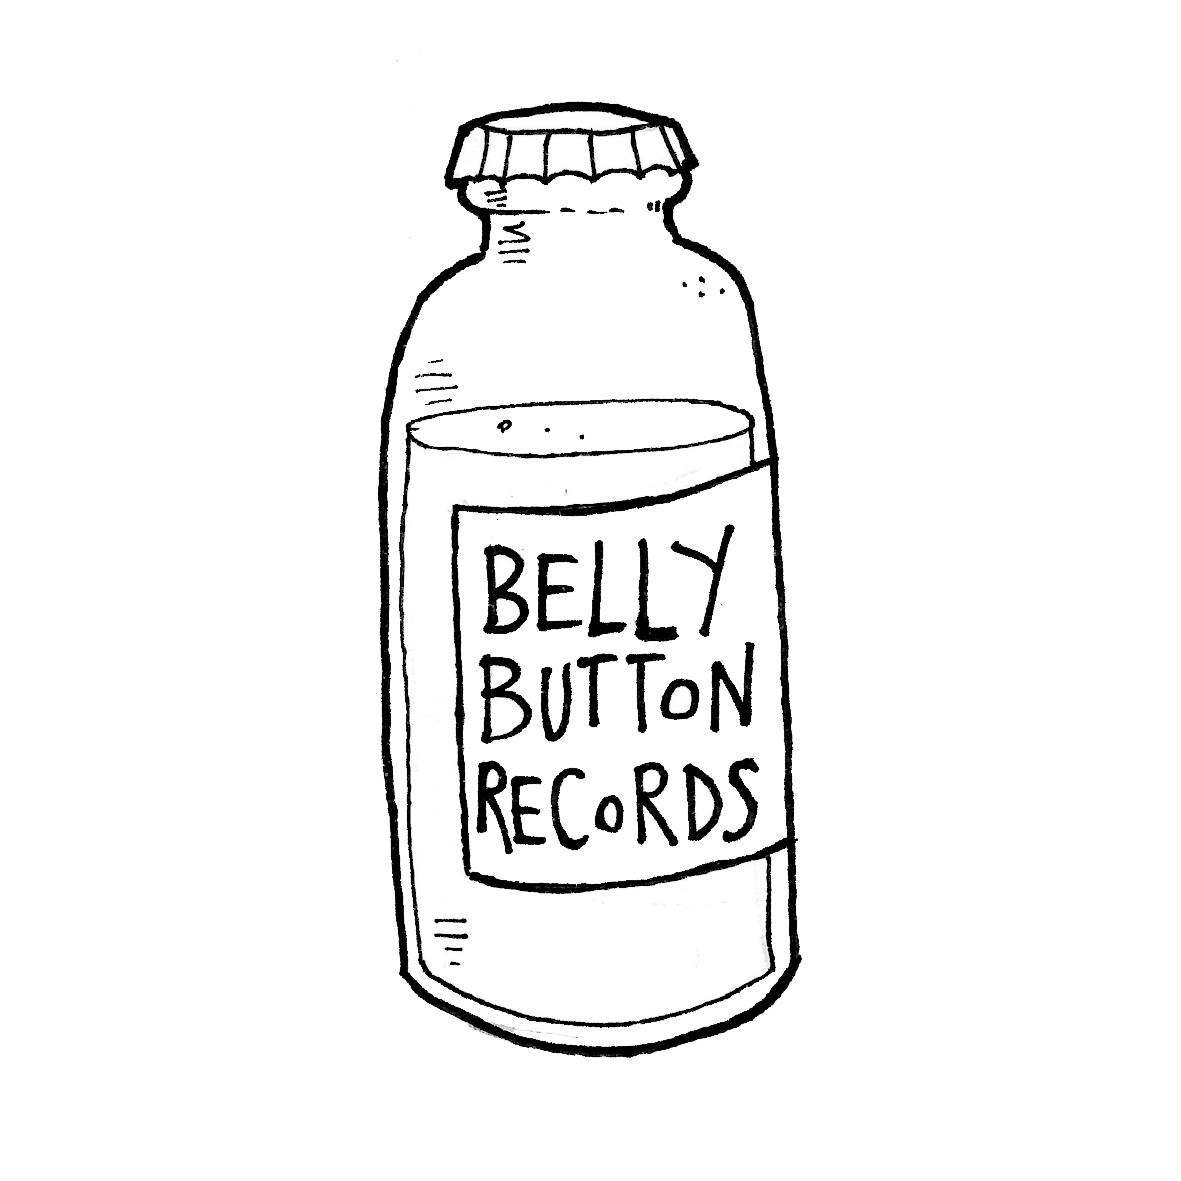 Belly Button Records